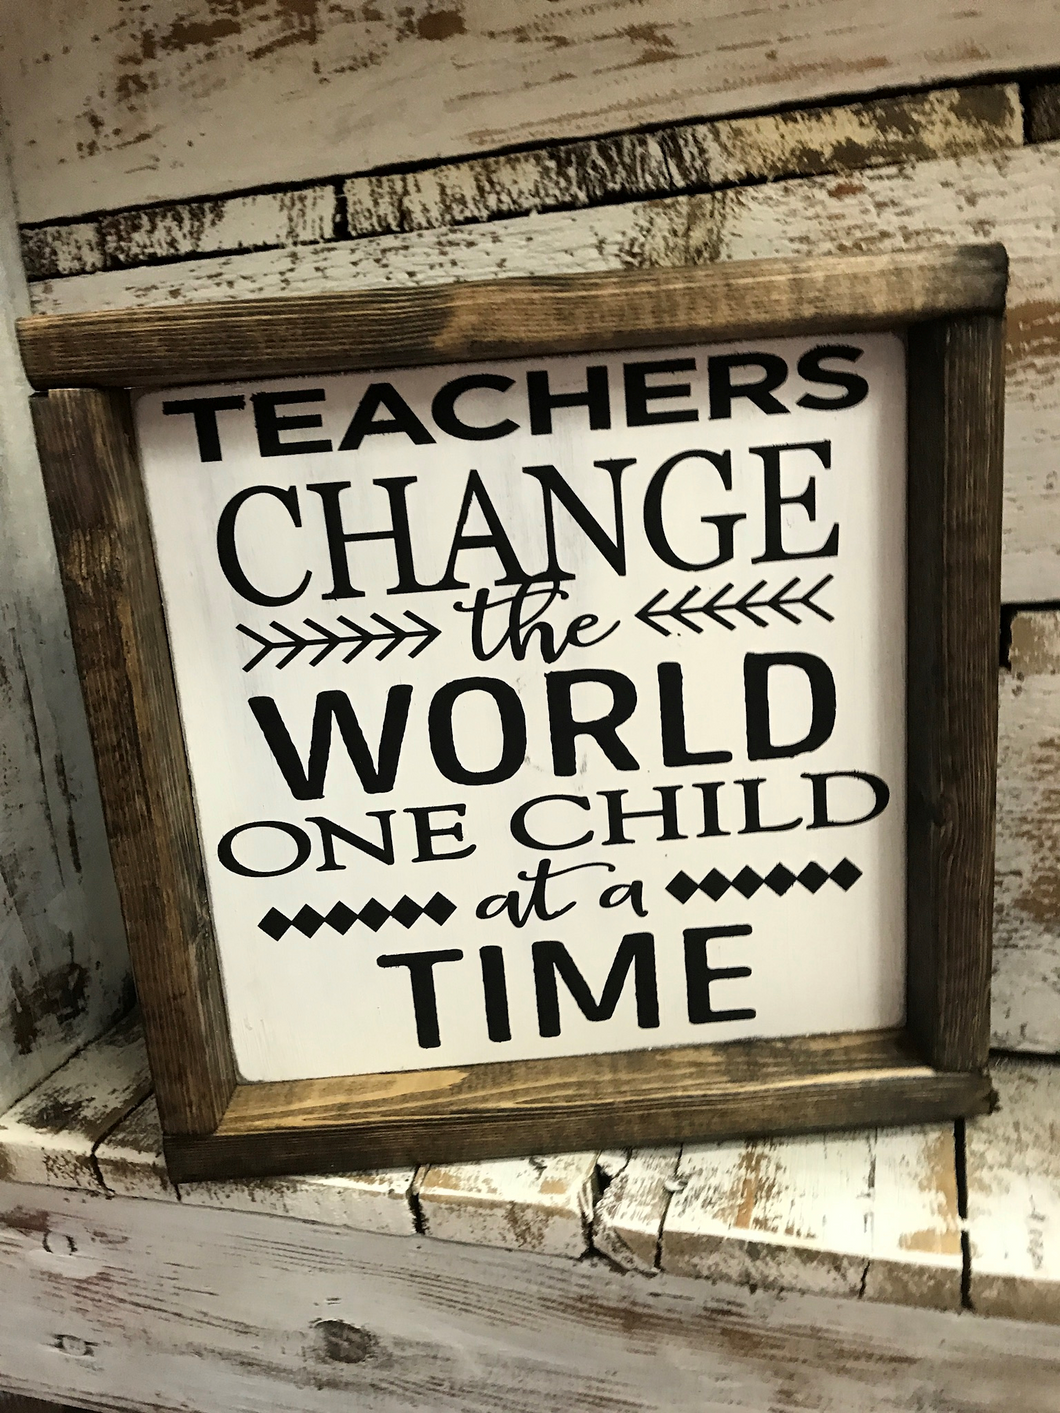 Teachers Change the World, Once Child at a time